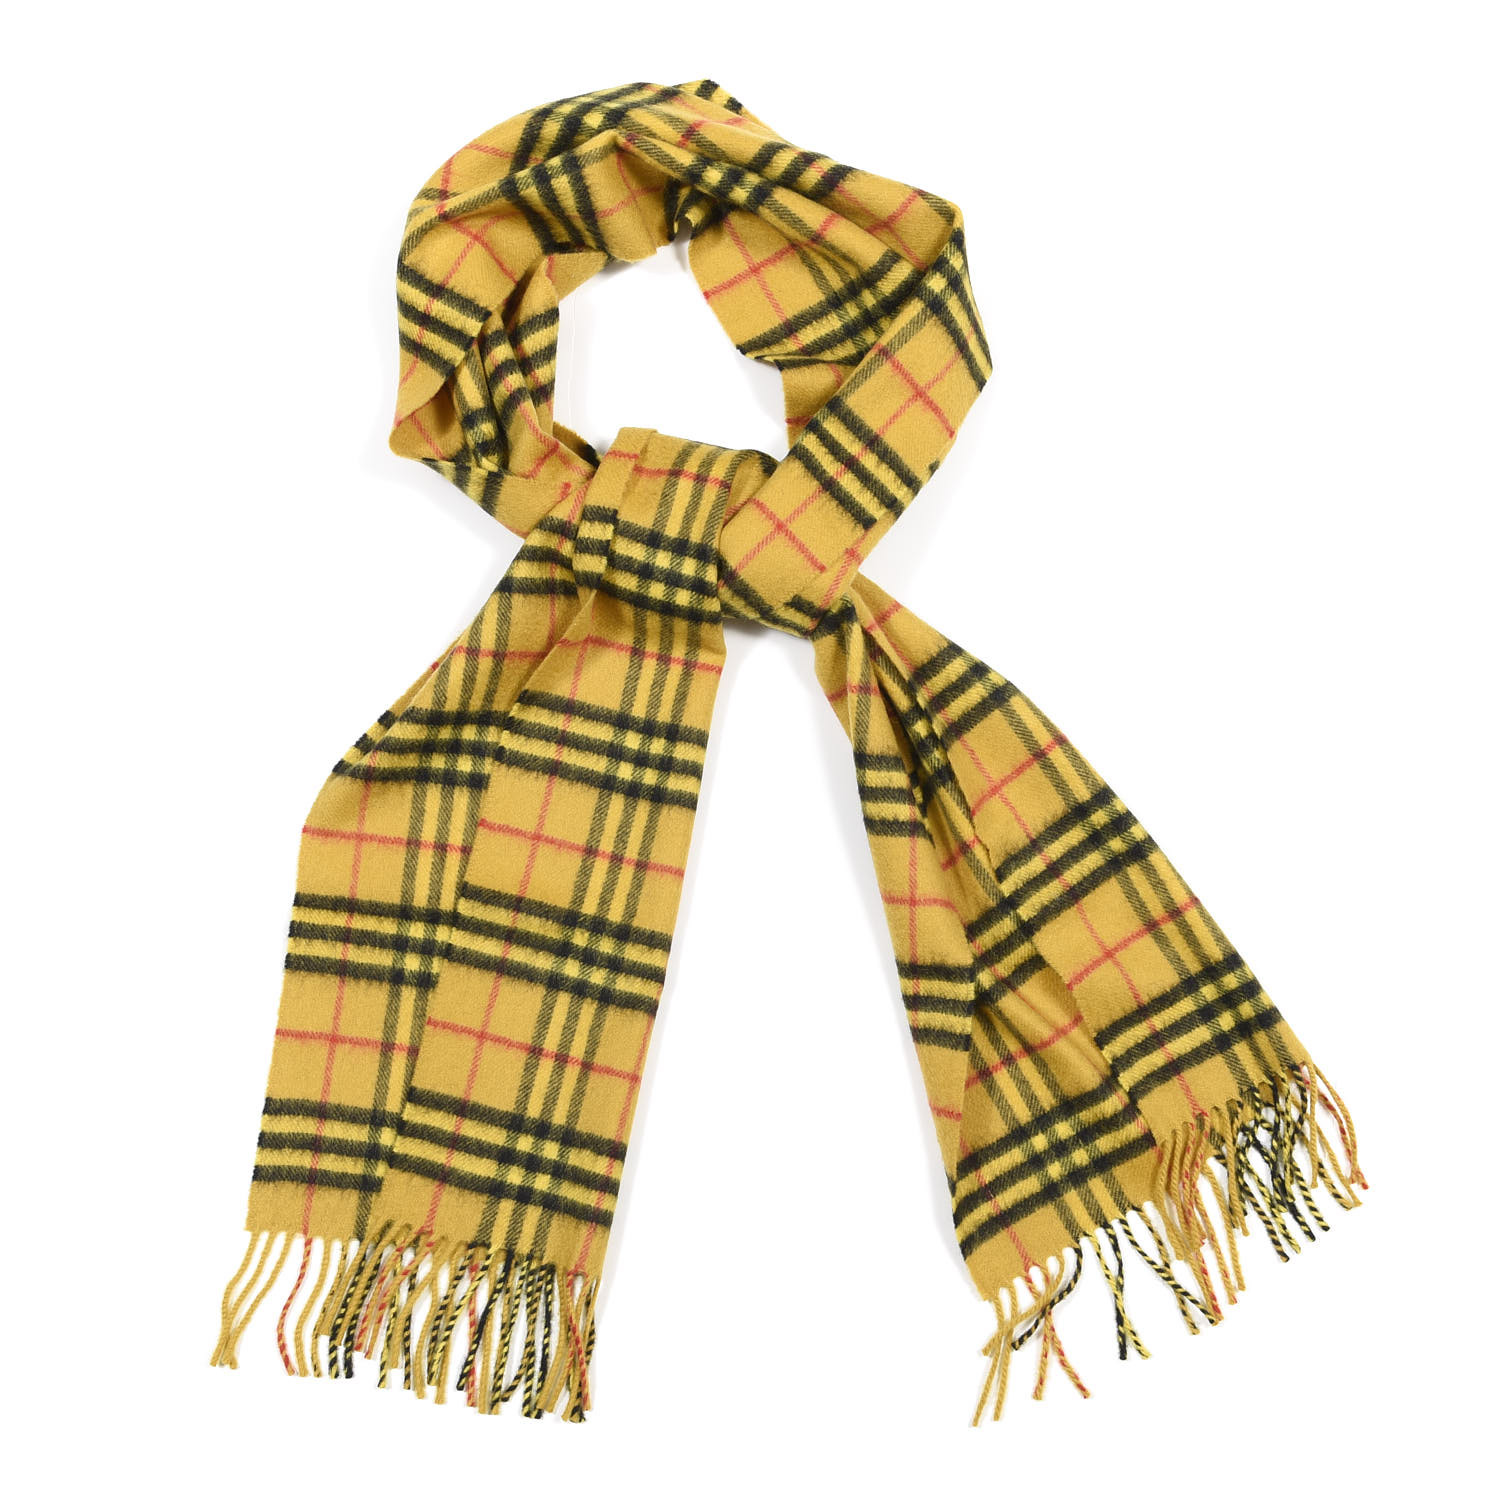 Burberry On Twitter: Honza Wears An Amber Yellow @Burberry Scarf